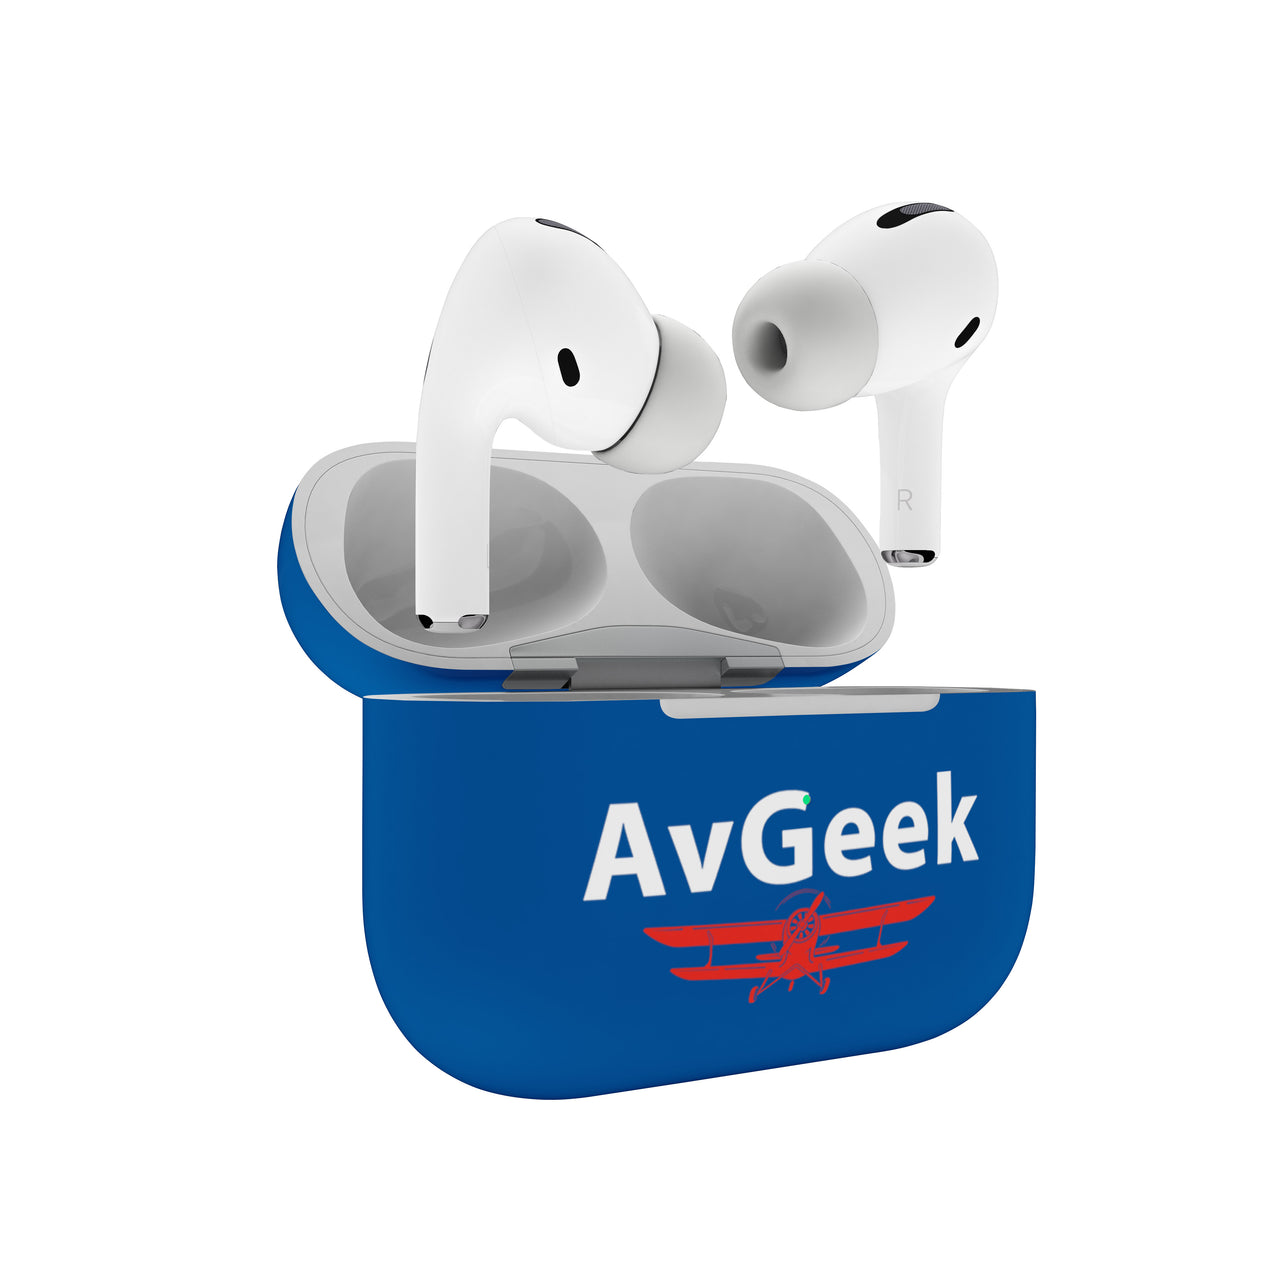 Avgeek Designed AirPods "Pro" Cases